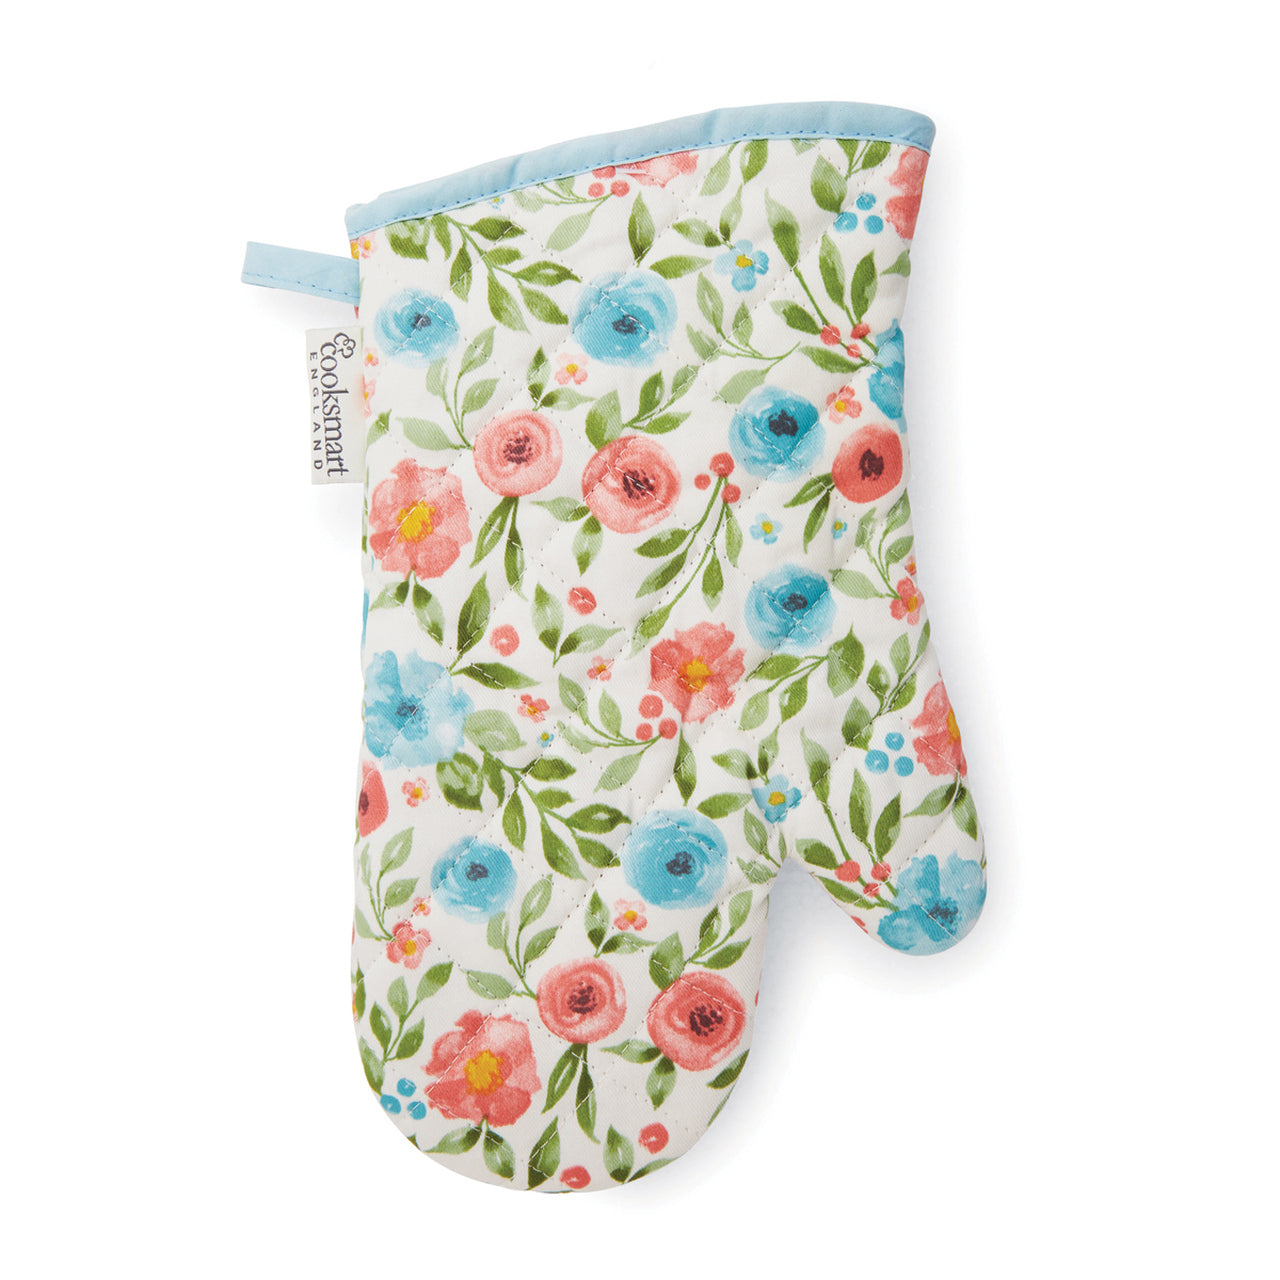 Cooksmart-Country Floral Oven Mitt-Organic Cotton